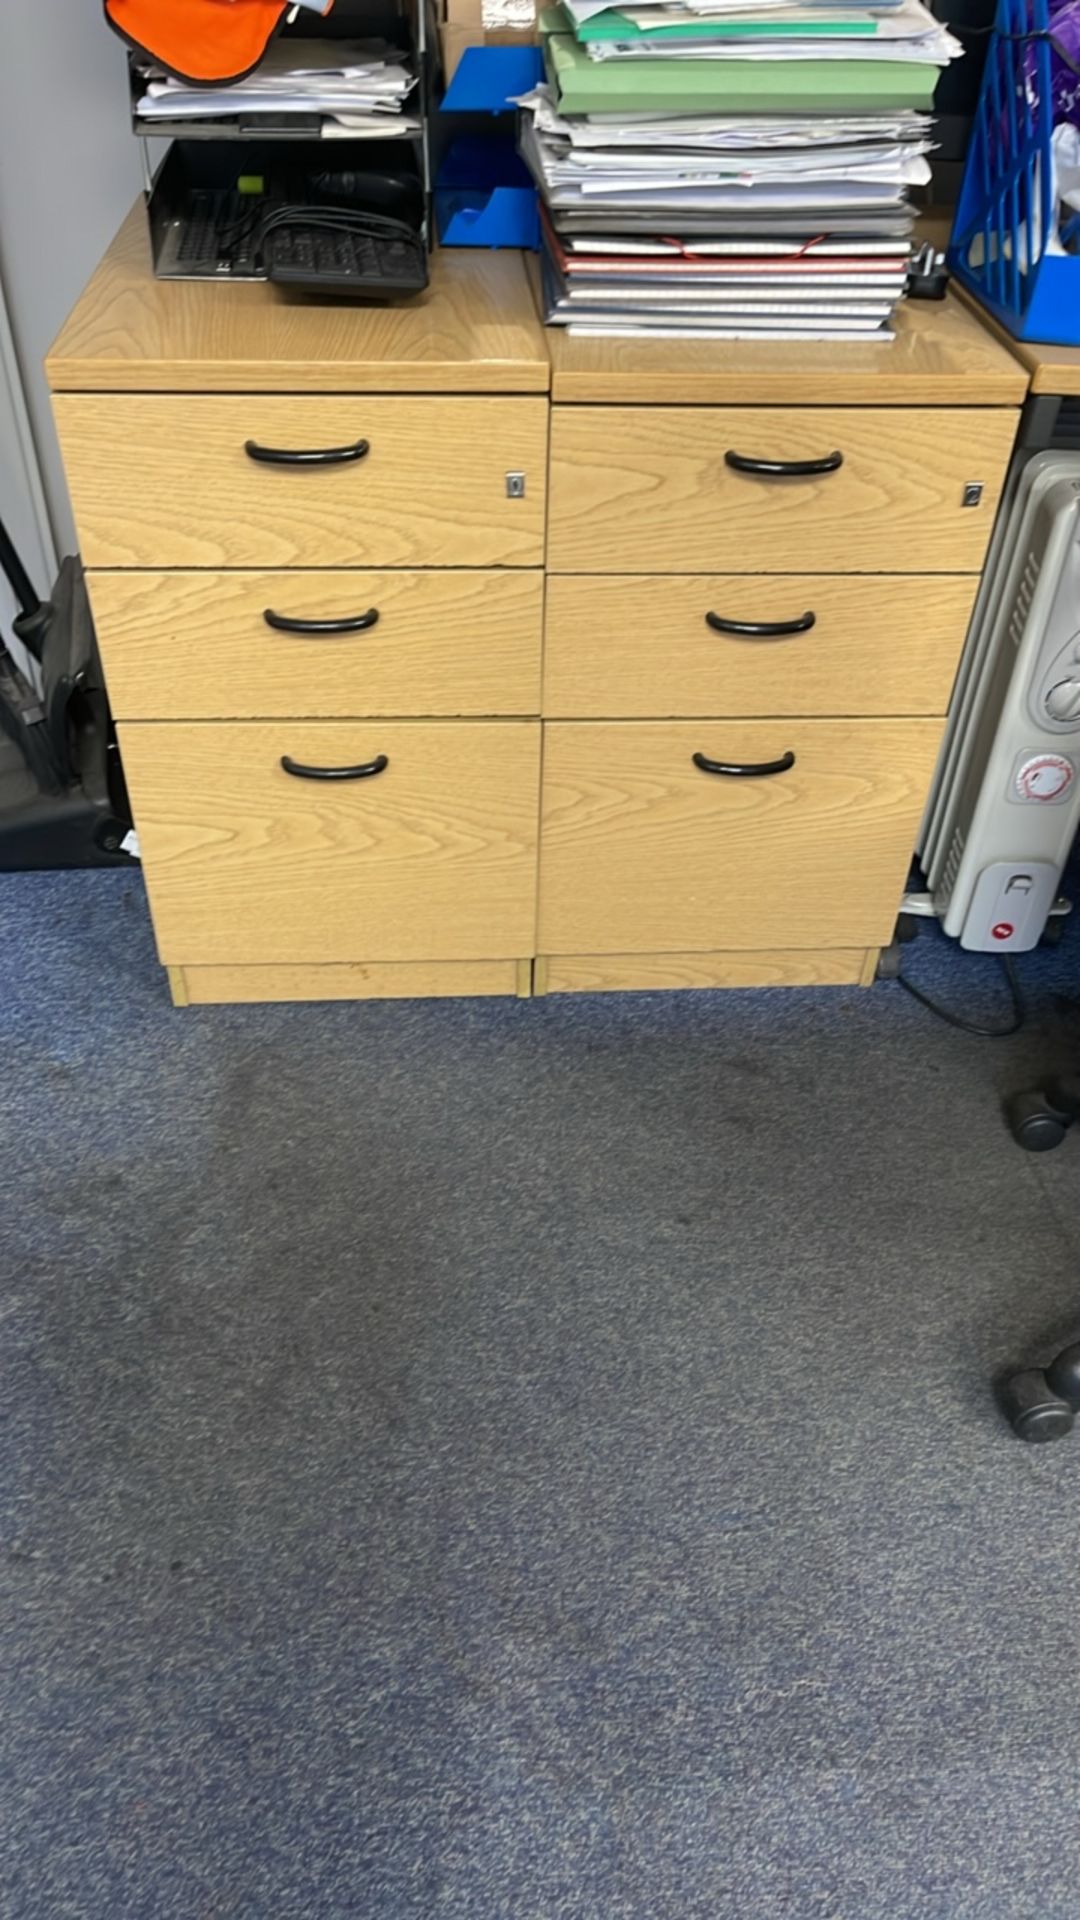 Bank Of 4 Desks, Chairs & Drawers - Image 18 of 18